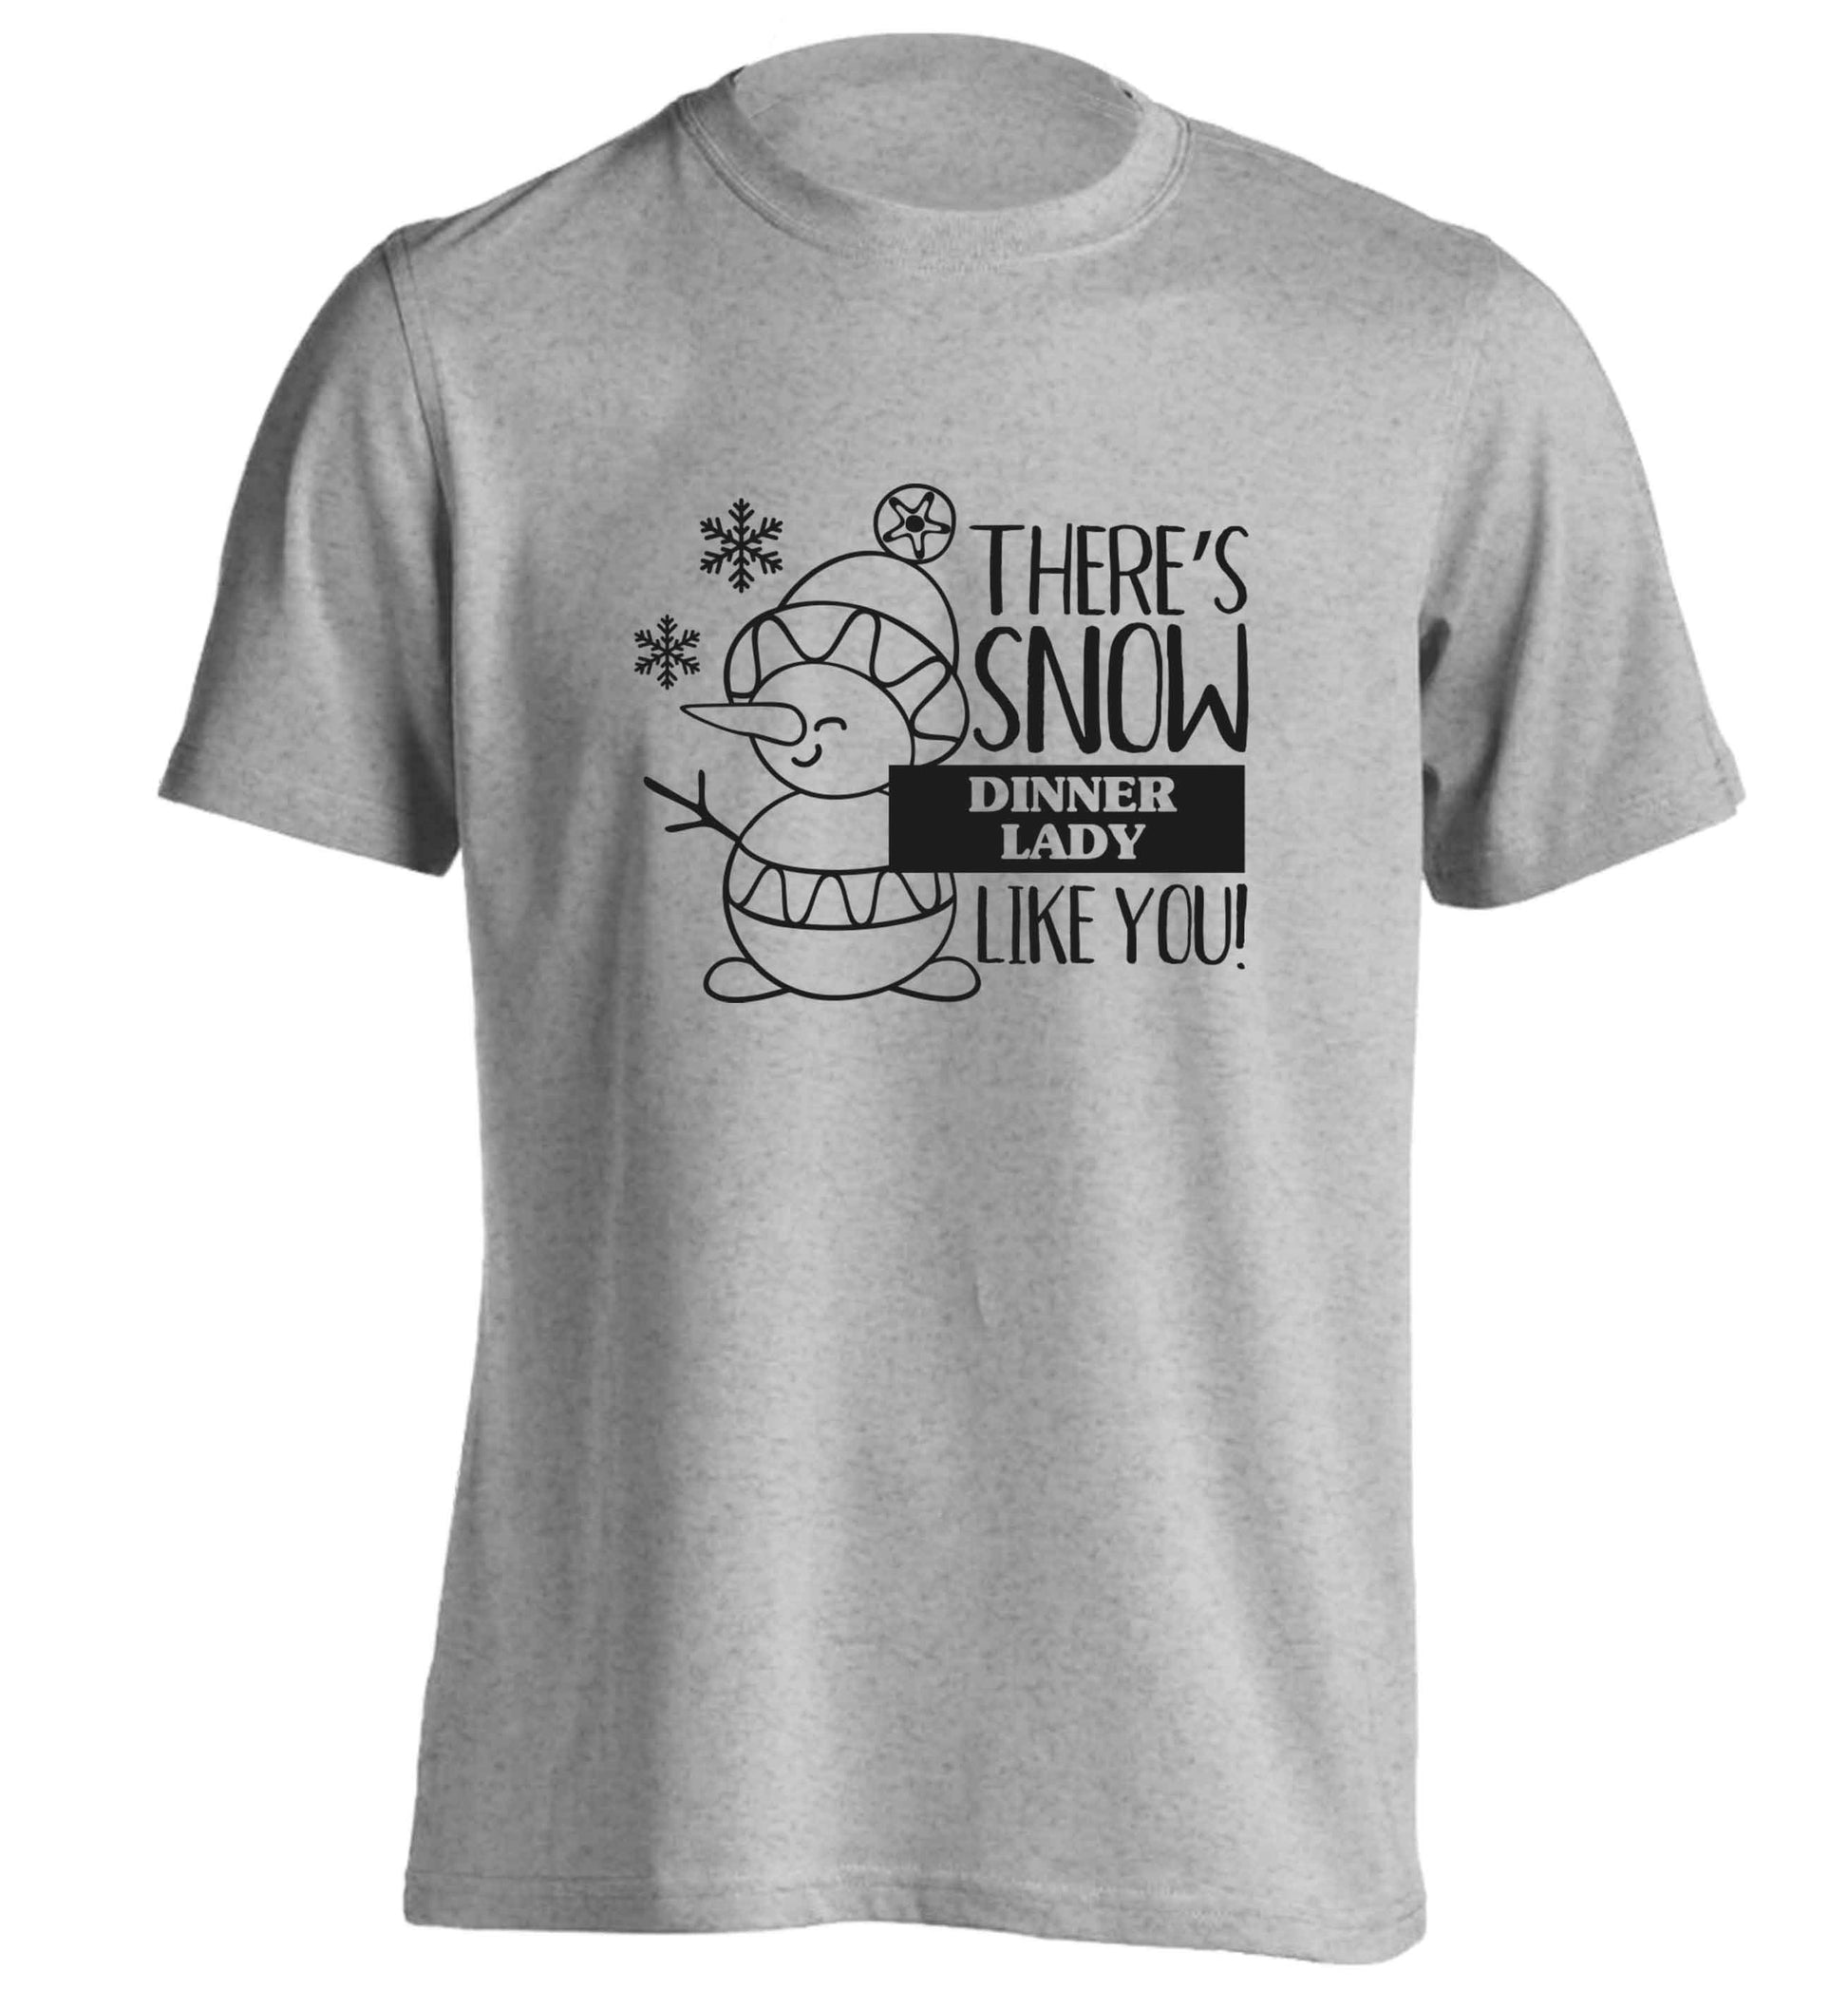 There's snow dinner lady like you adults unisex grey Tshirt 2XL